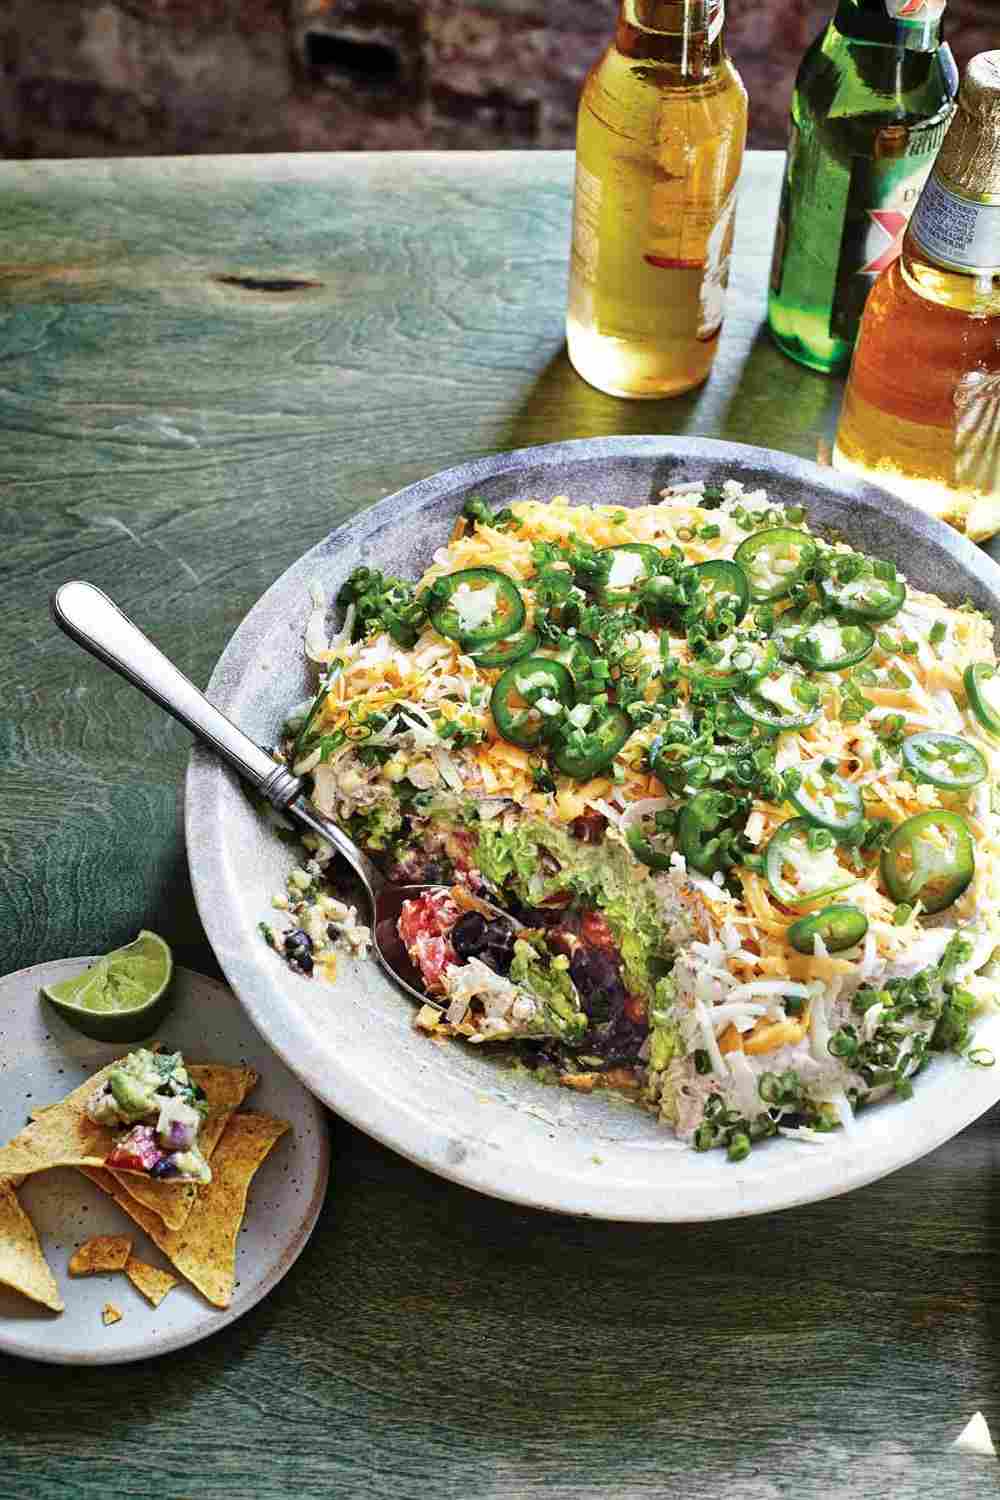 jalapeno on mexican layer salad with grated cheddar cheese and tortilla